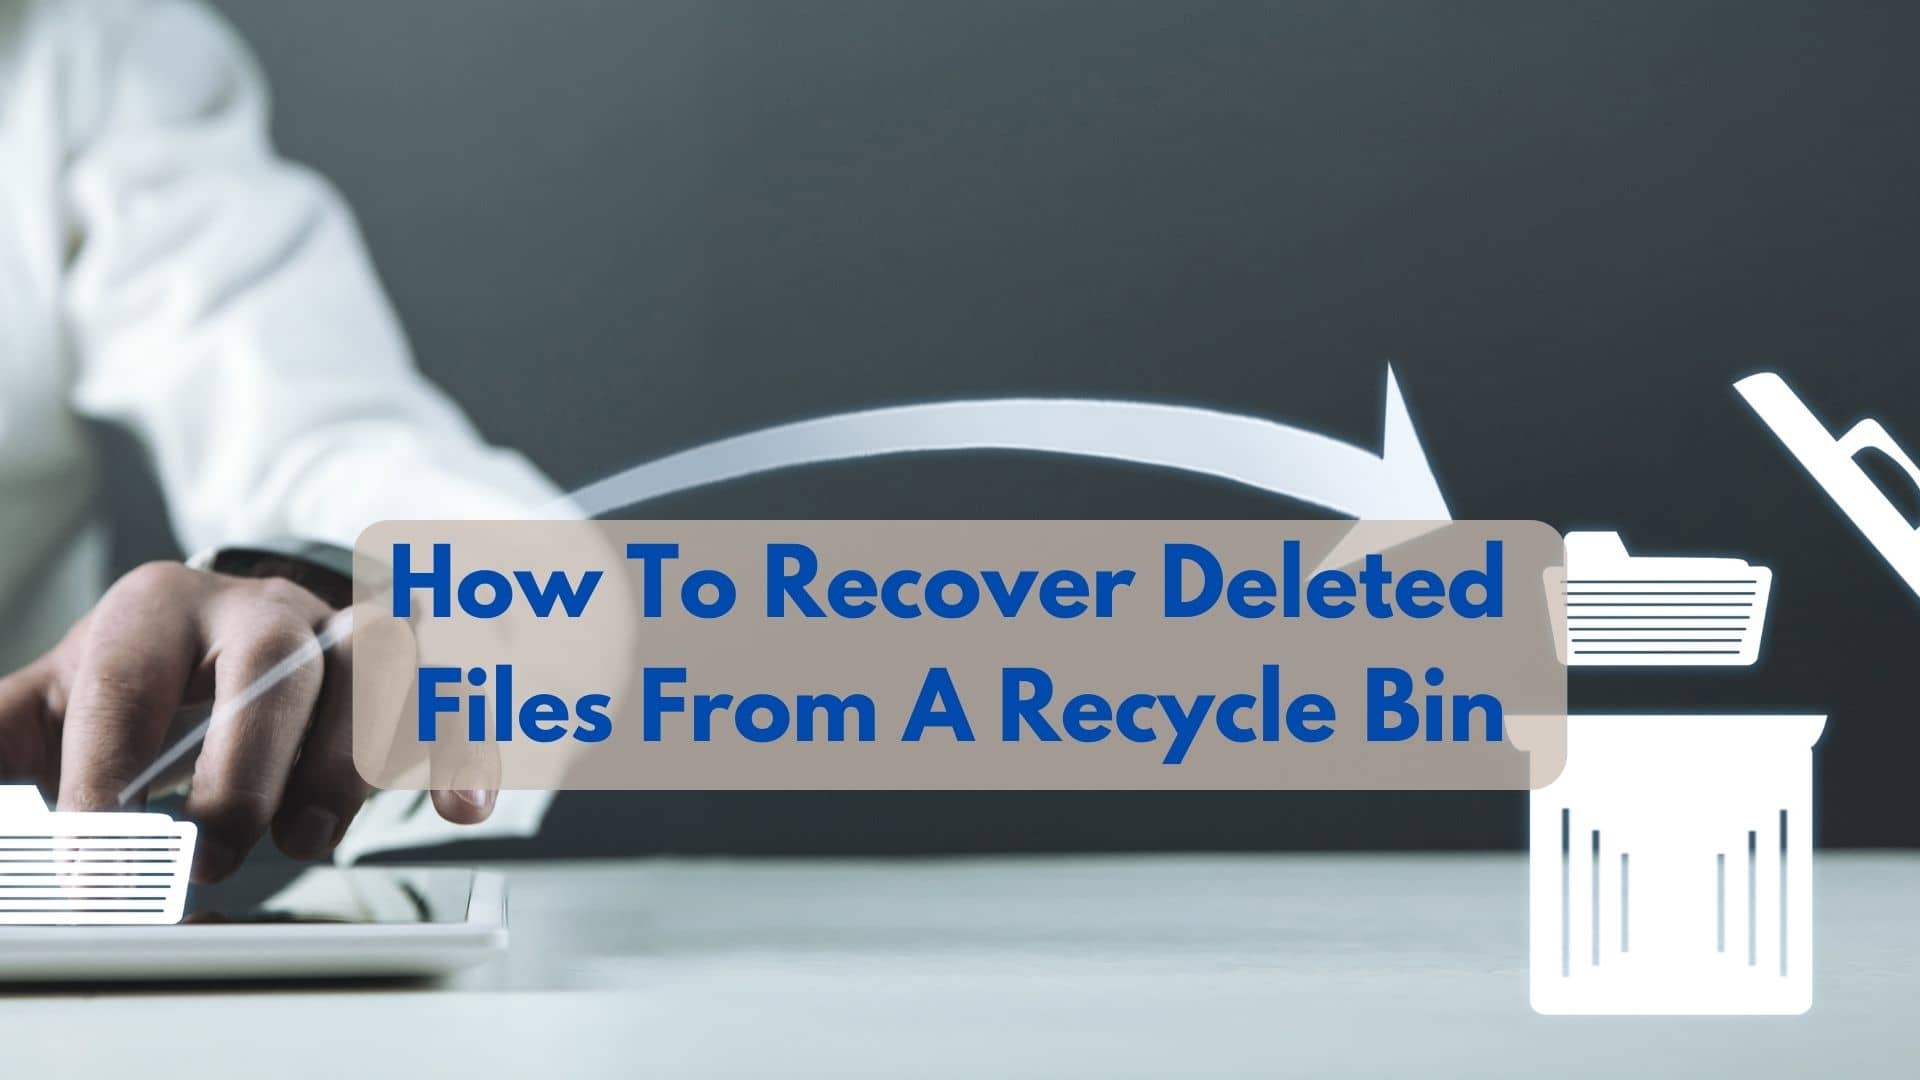 How To Recover Deleted Files From A Recycle Bin?